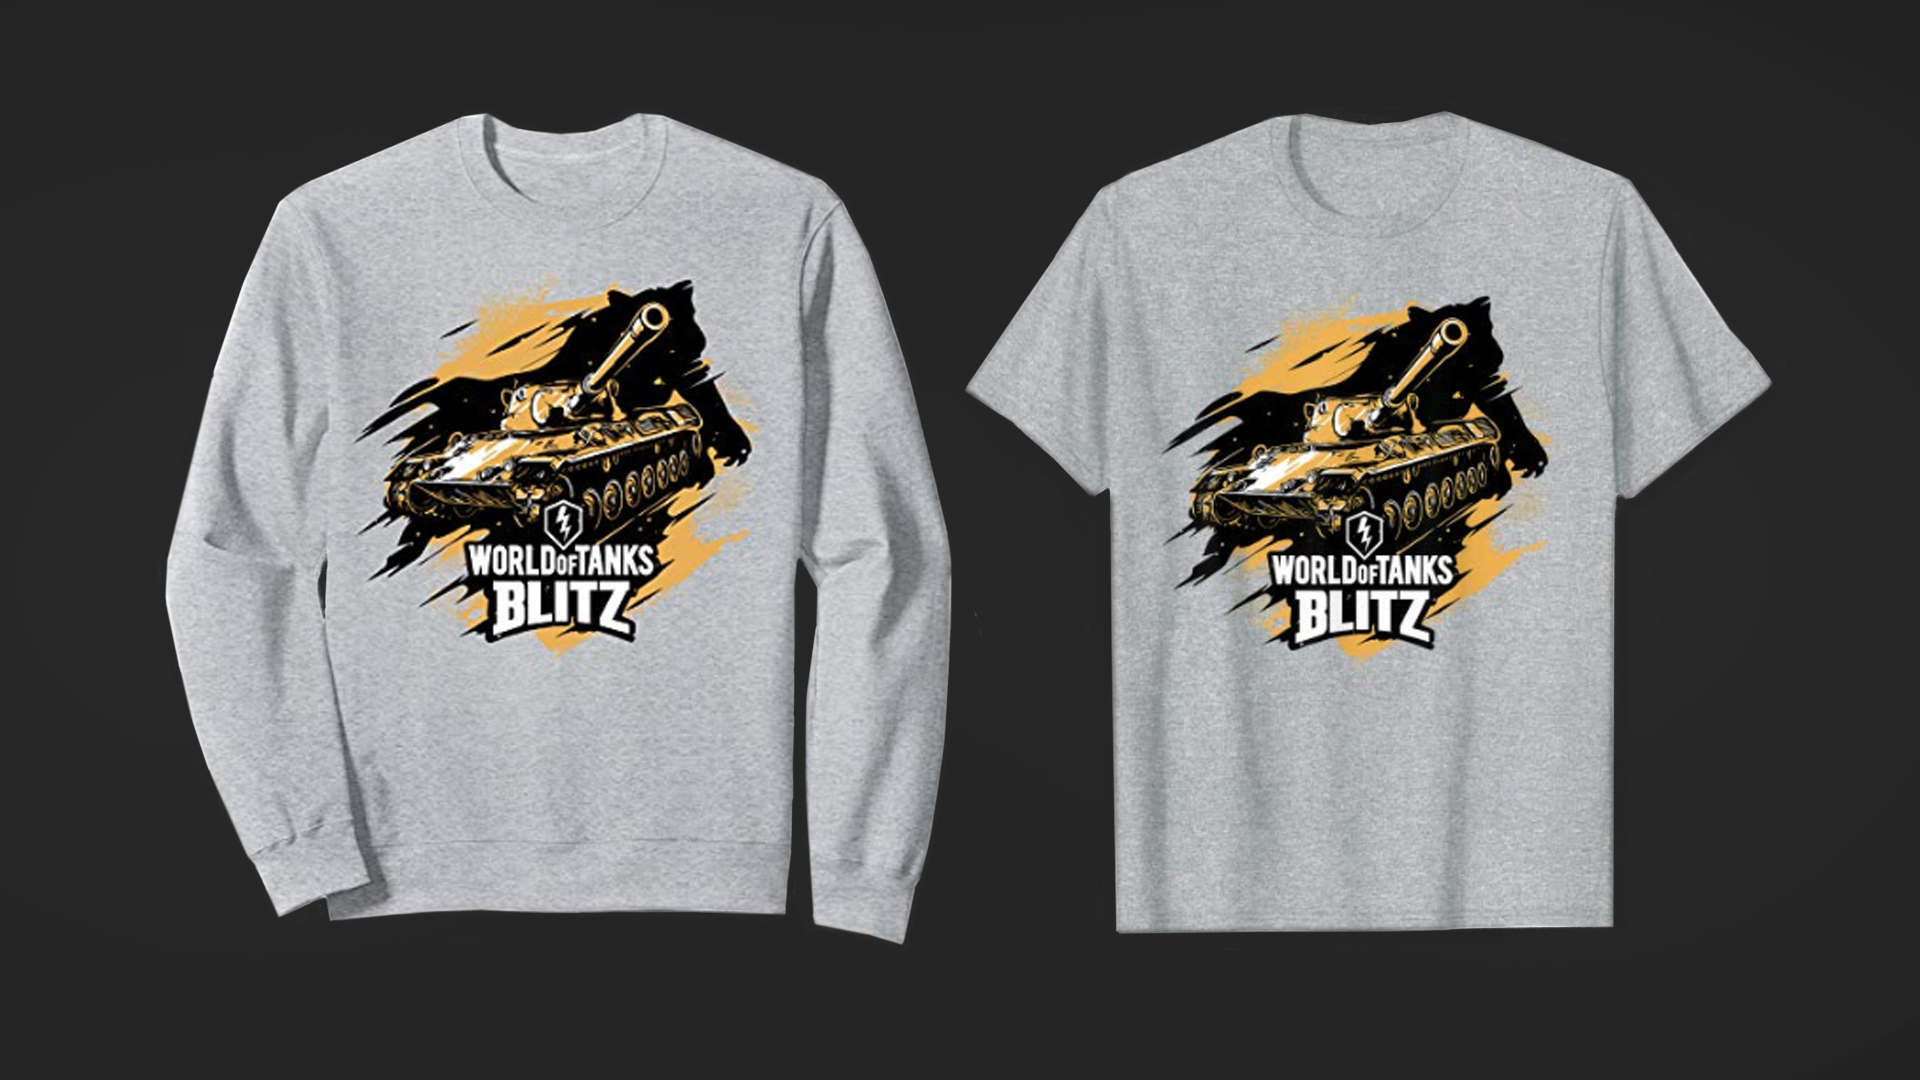 A New Stylish T Shirt With A Tank World Of Tanks Blitz